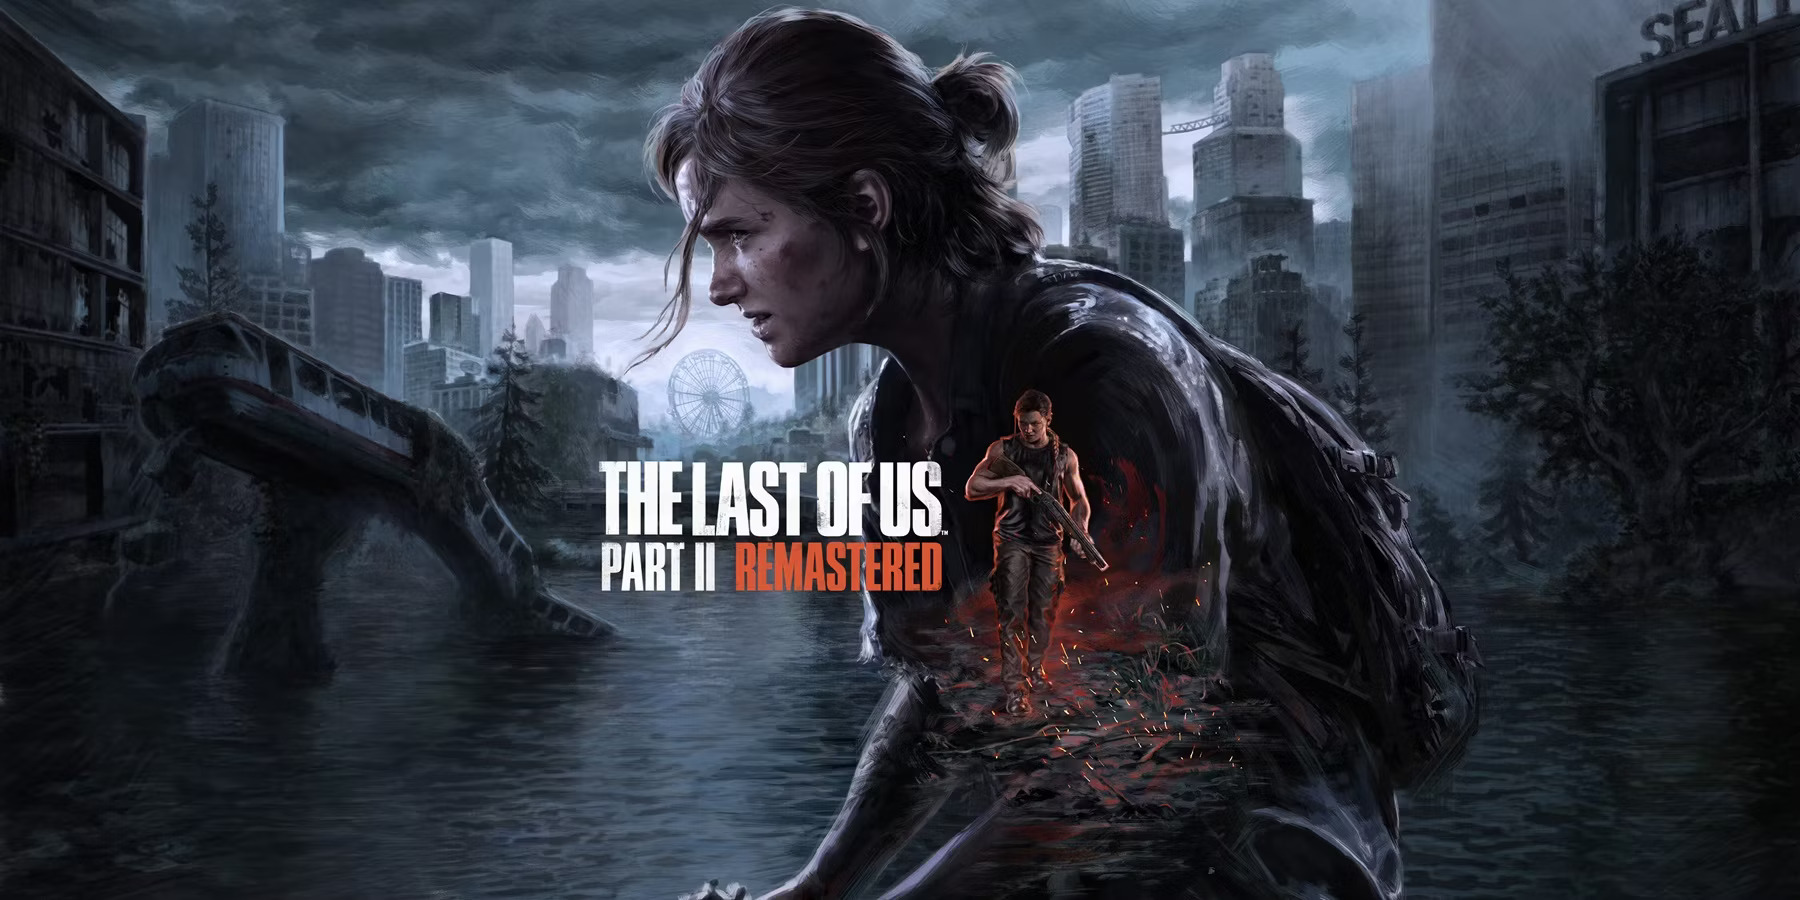 The Last of Us Part II: A Riveting Tale of Revenge and Redemption